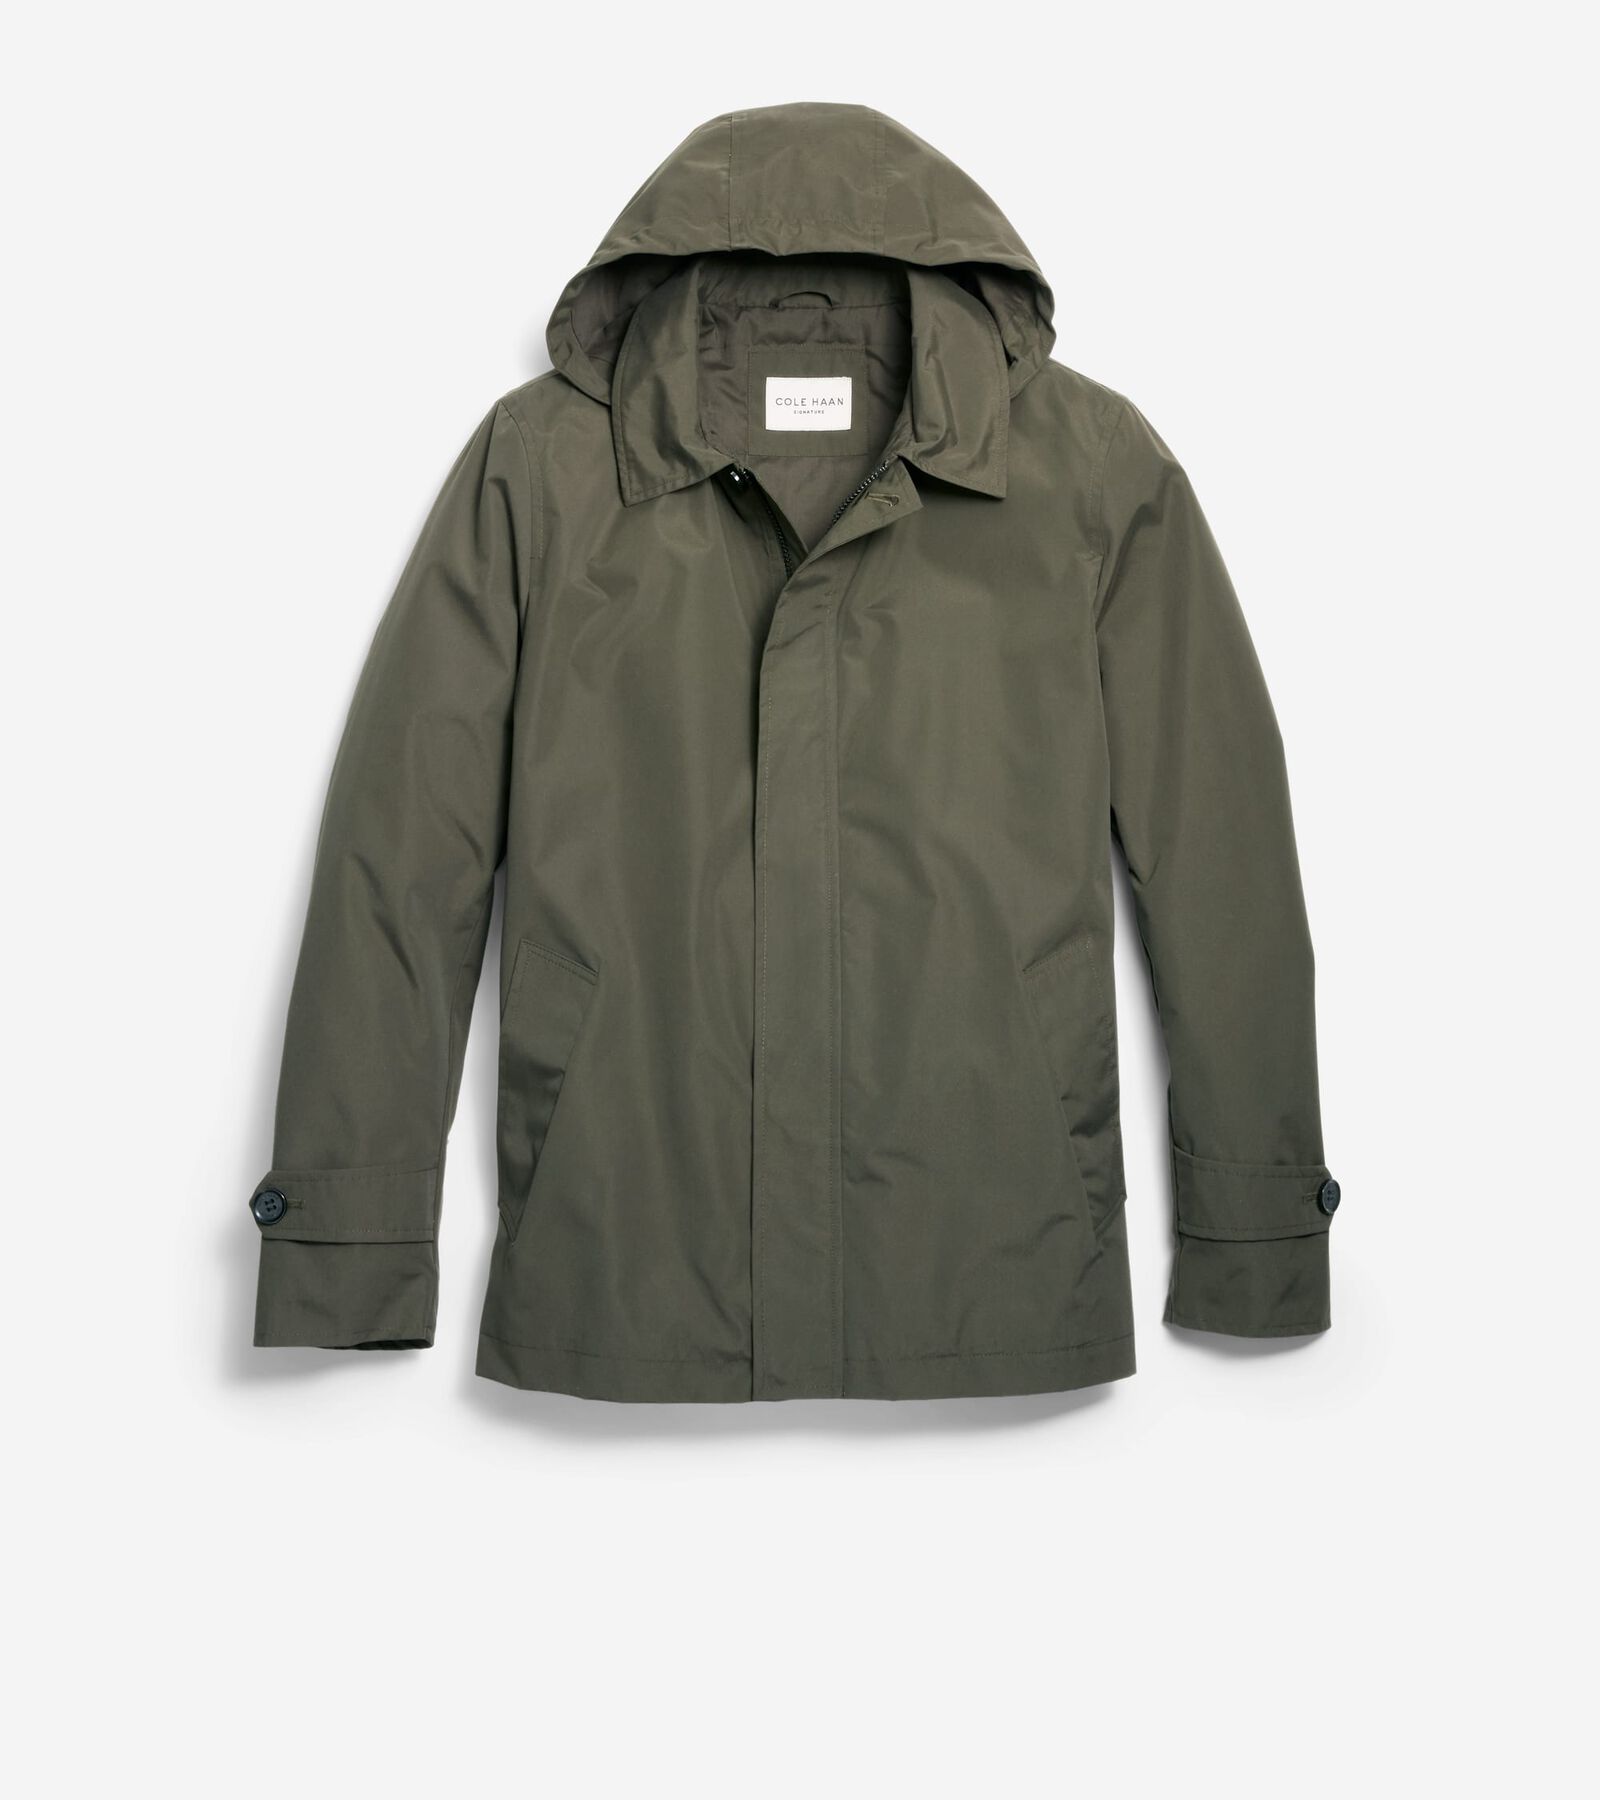 Cole Haan Hooded Rain Jacket In Olive